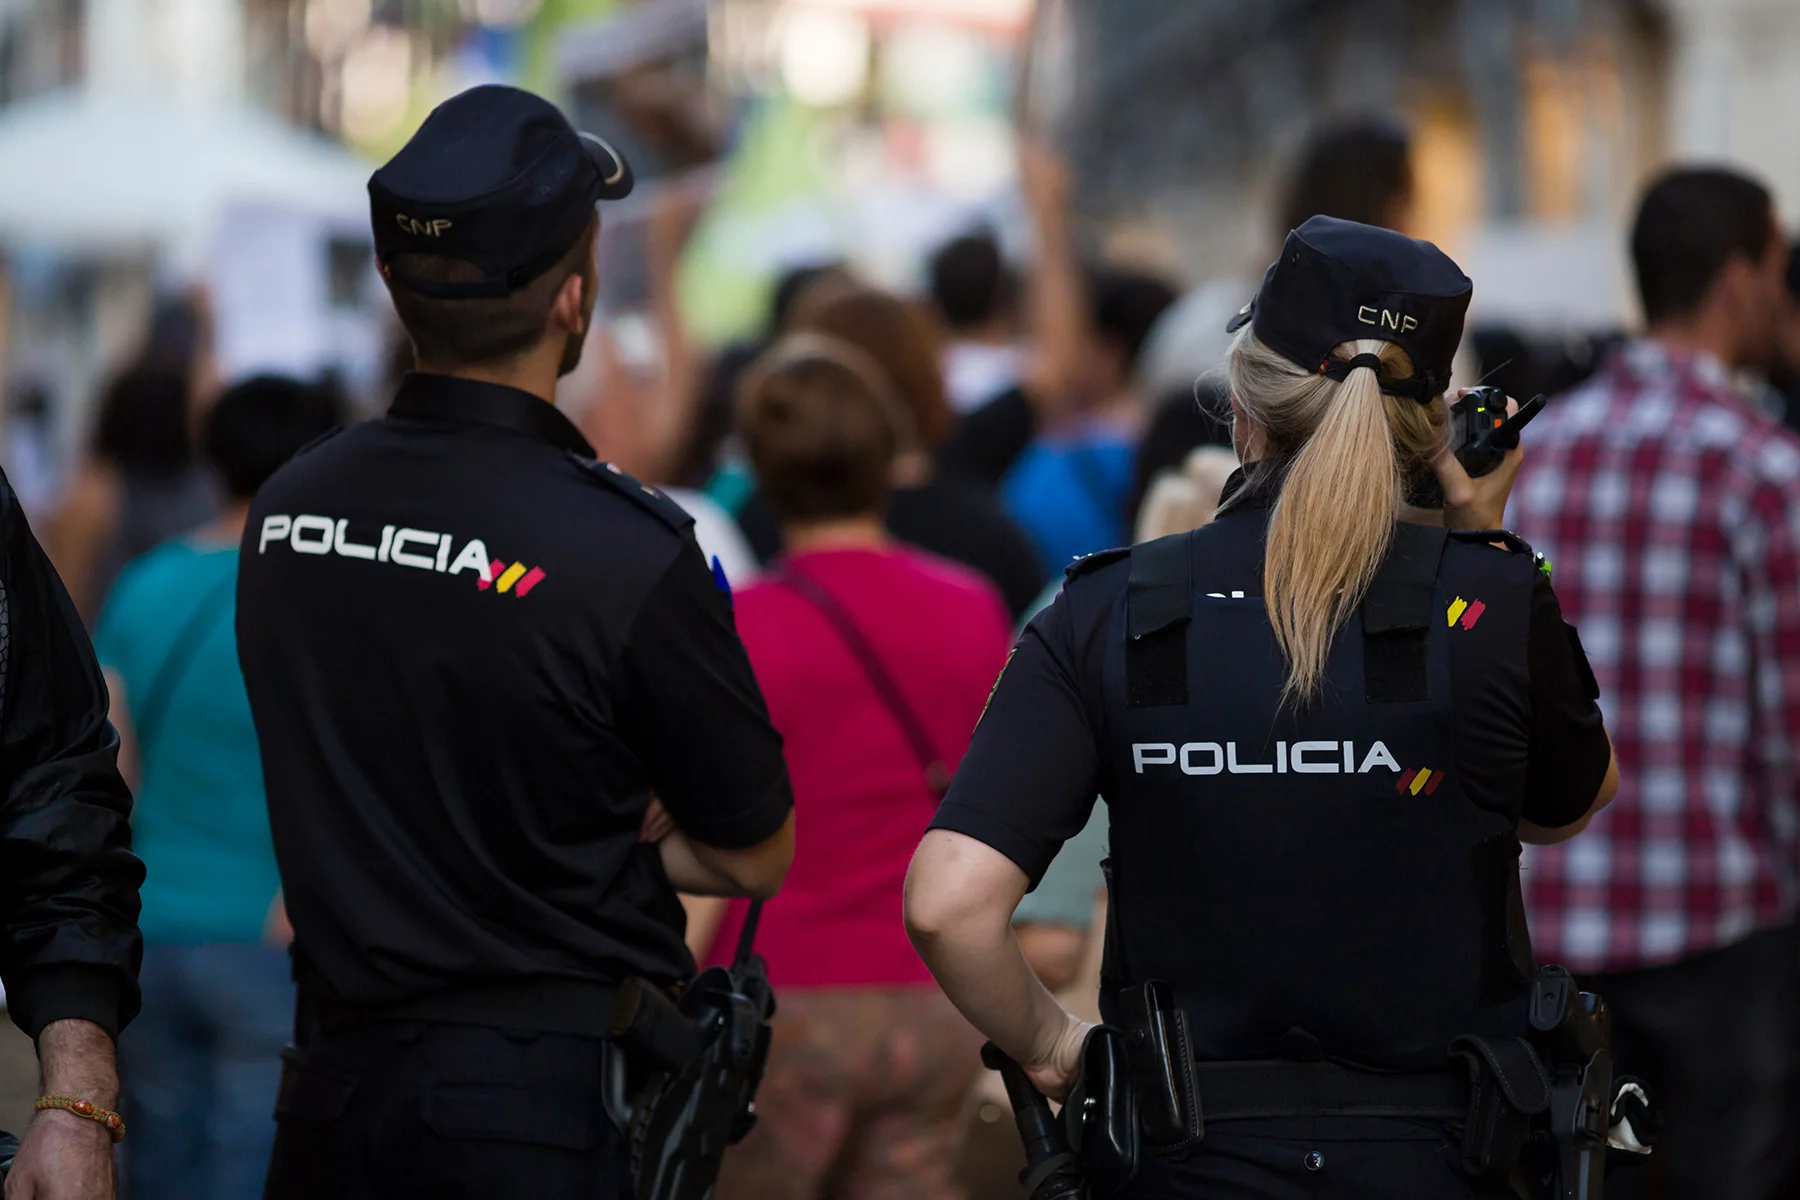 Spanish police officers